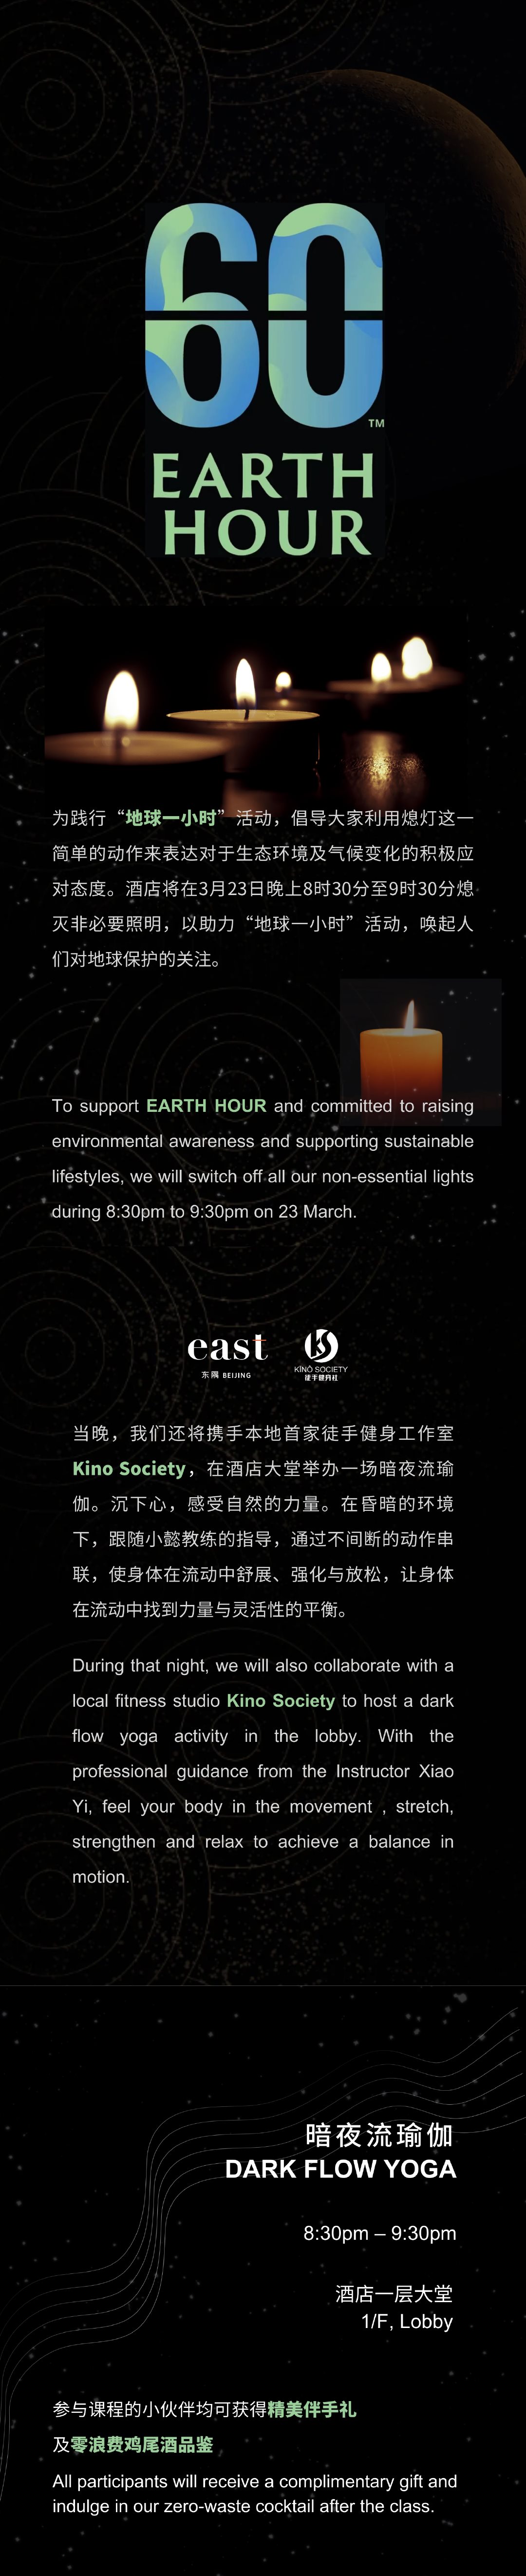 earth hour details.png